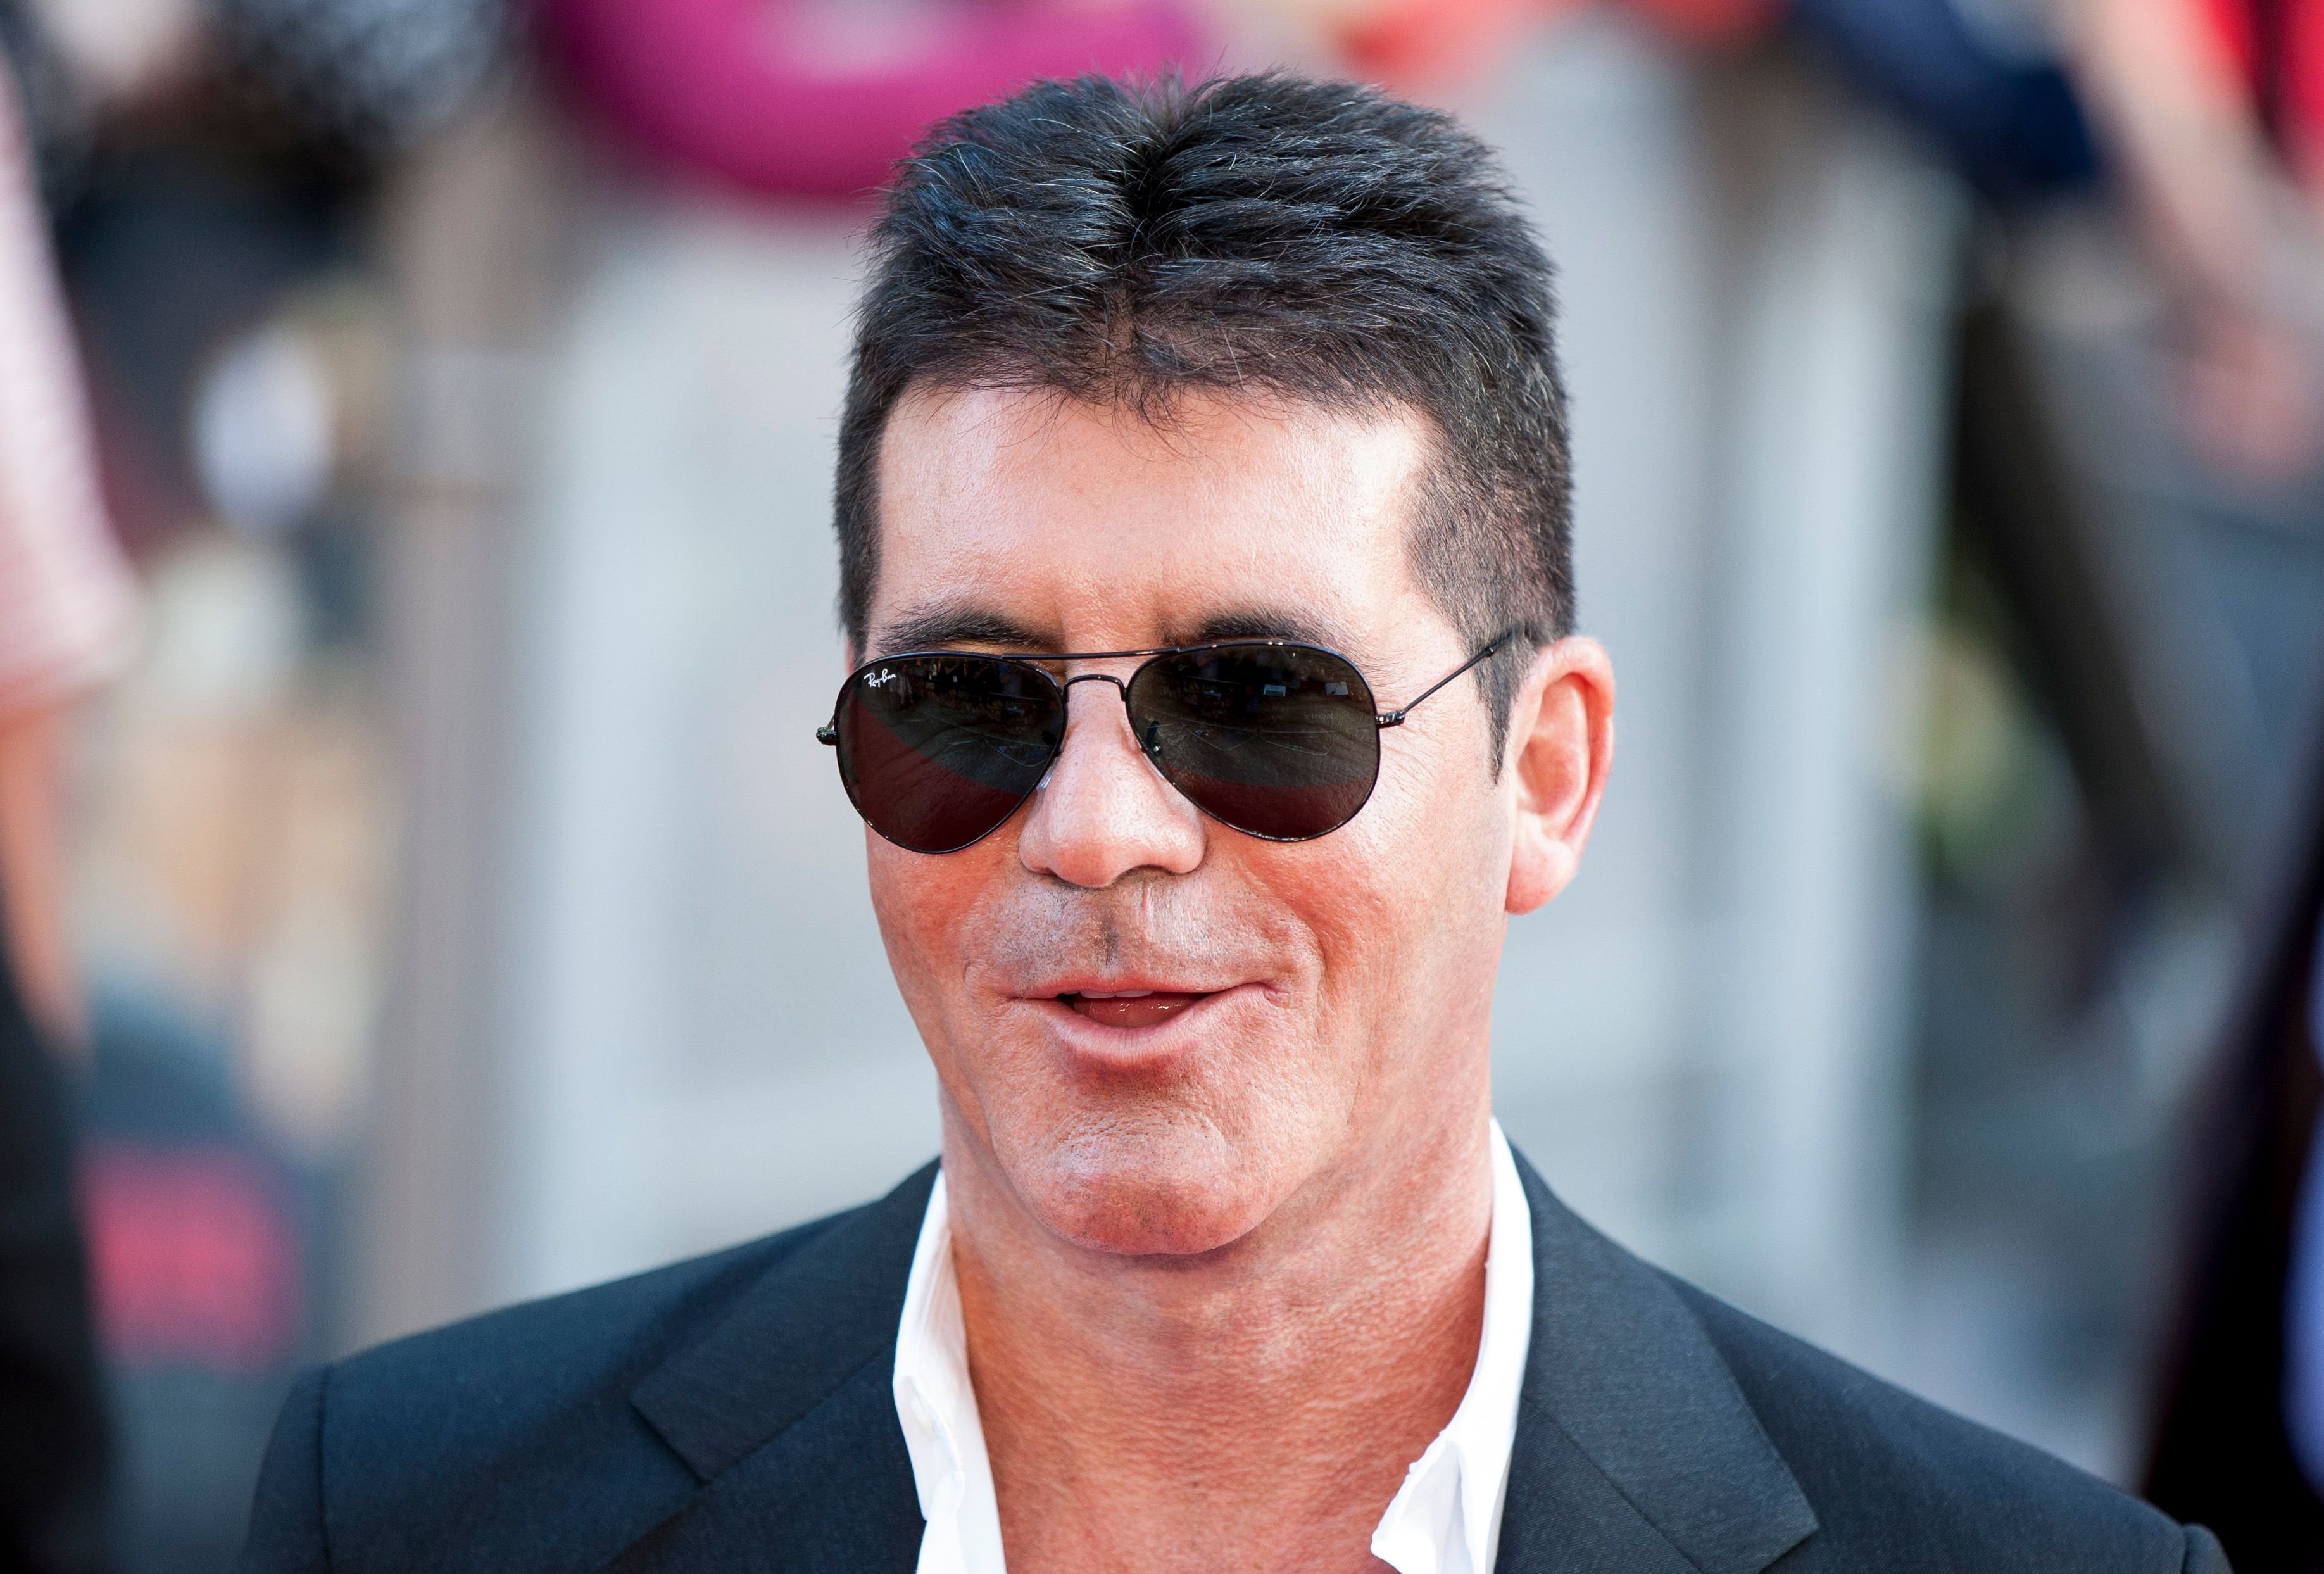 Simon Cowell at the World Premiere of "One Direction: This Is Us" on August 20, 2013, in London, England | Photo: John Phillips/UK Press/Getty Images